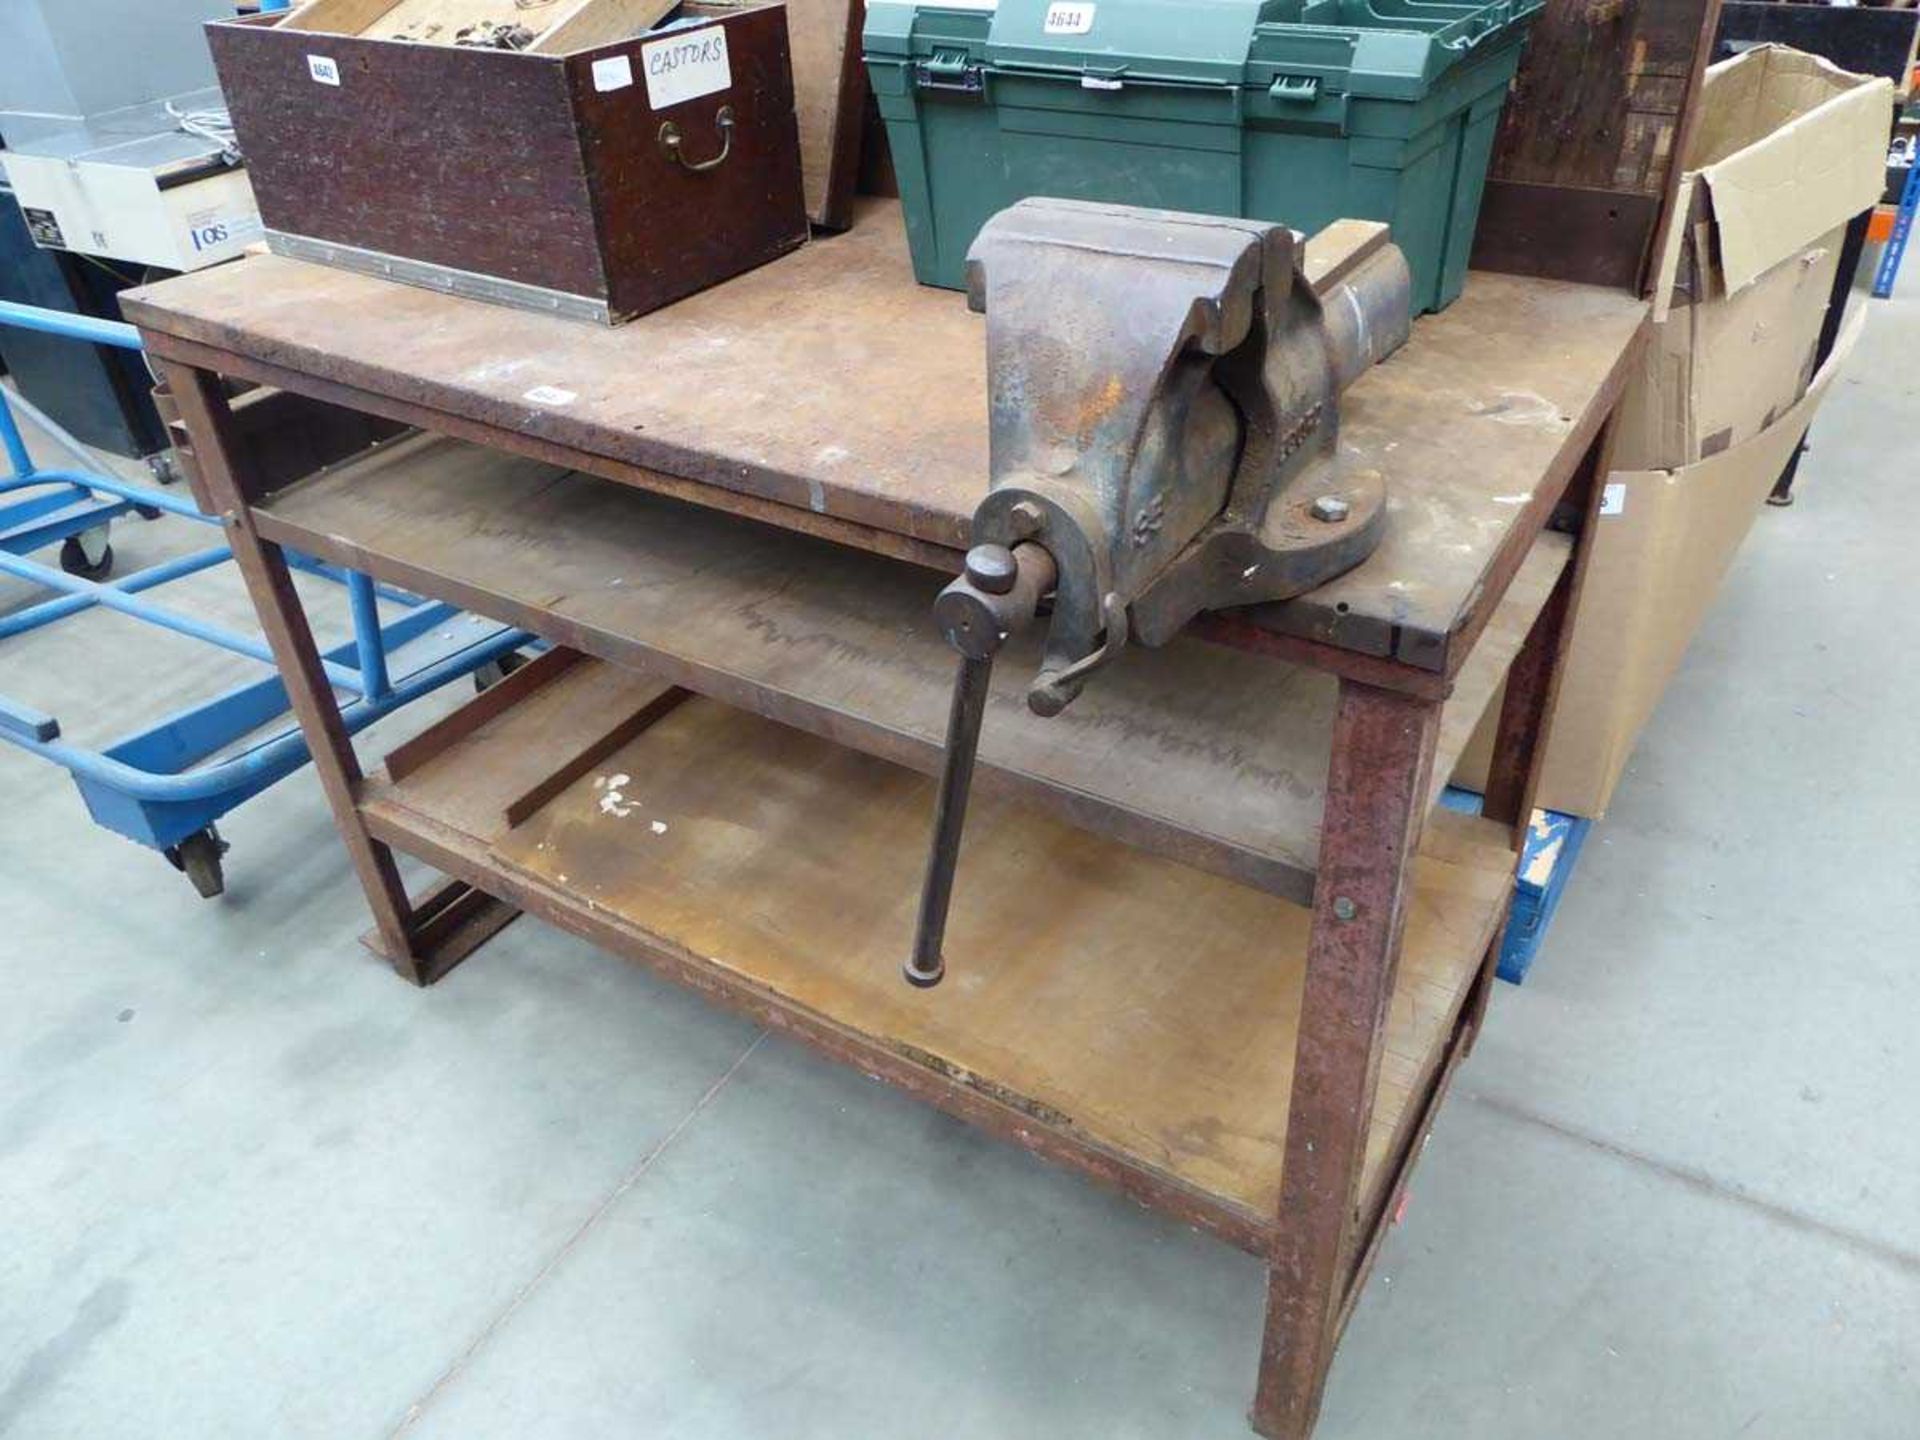 Heavy duty metal working bench with vice